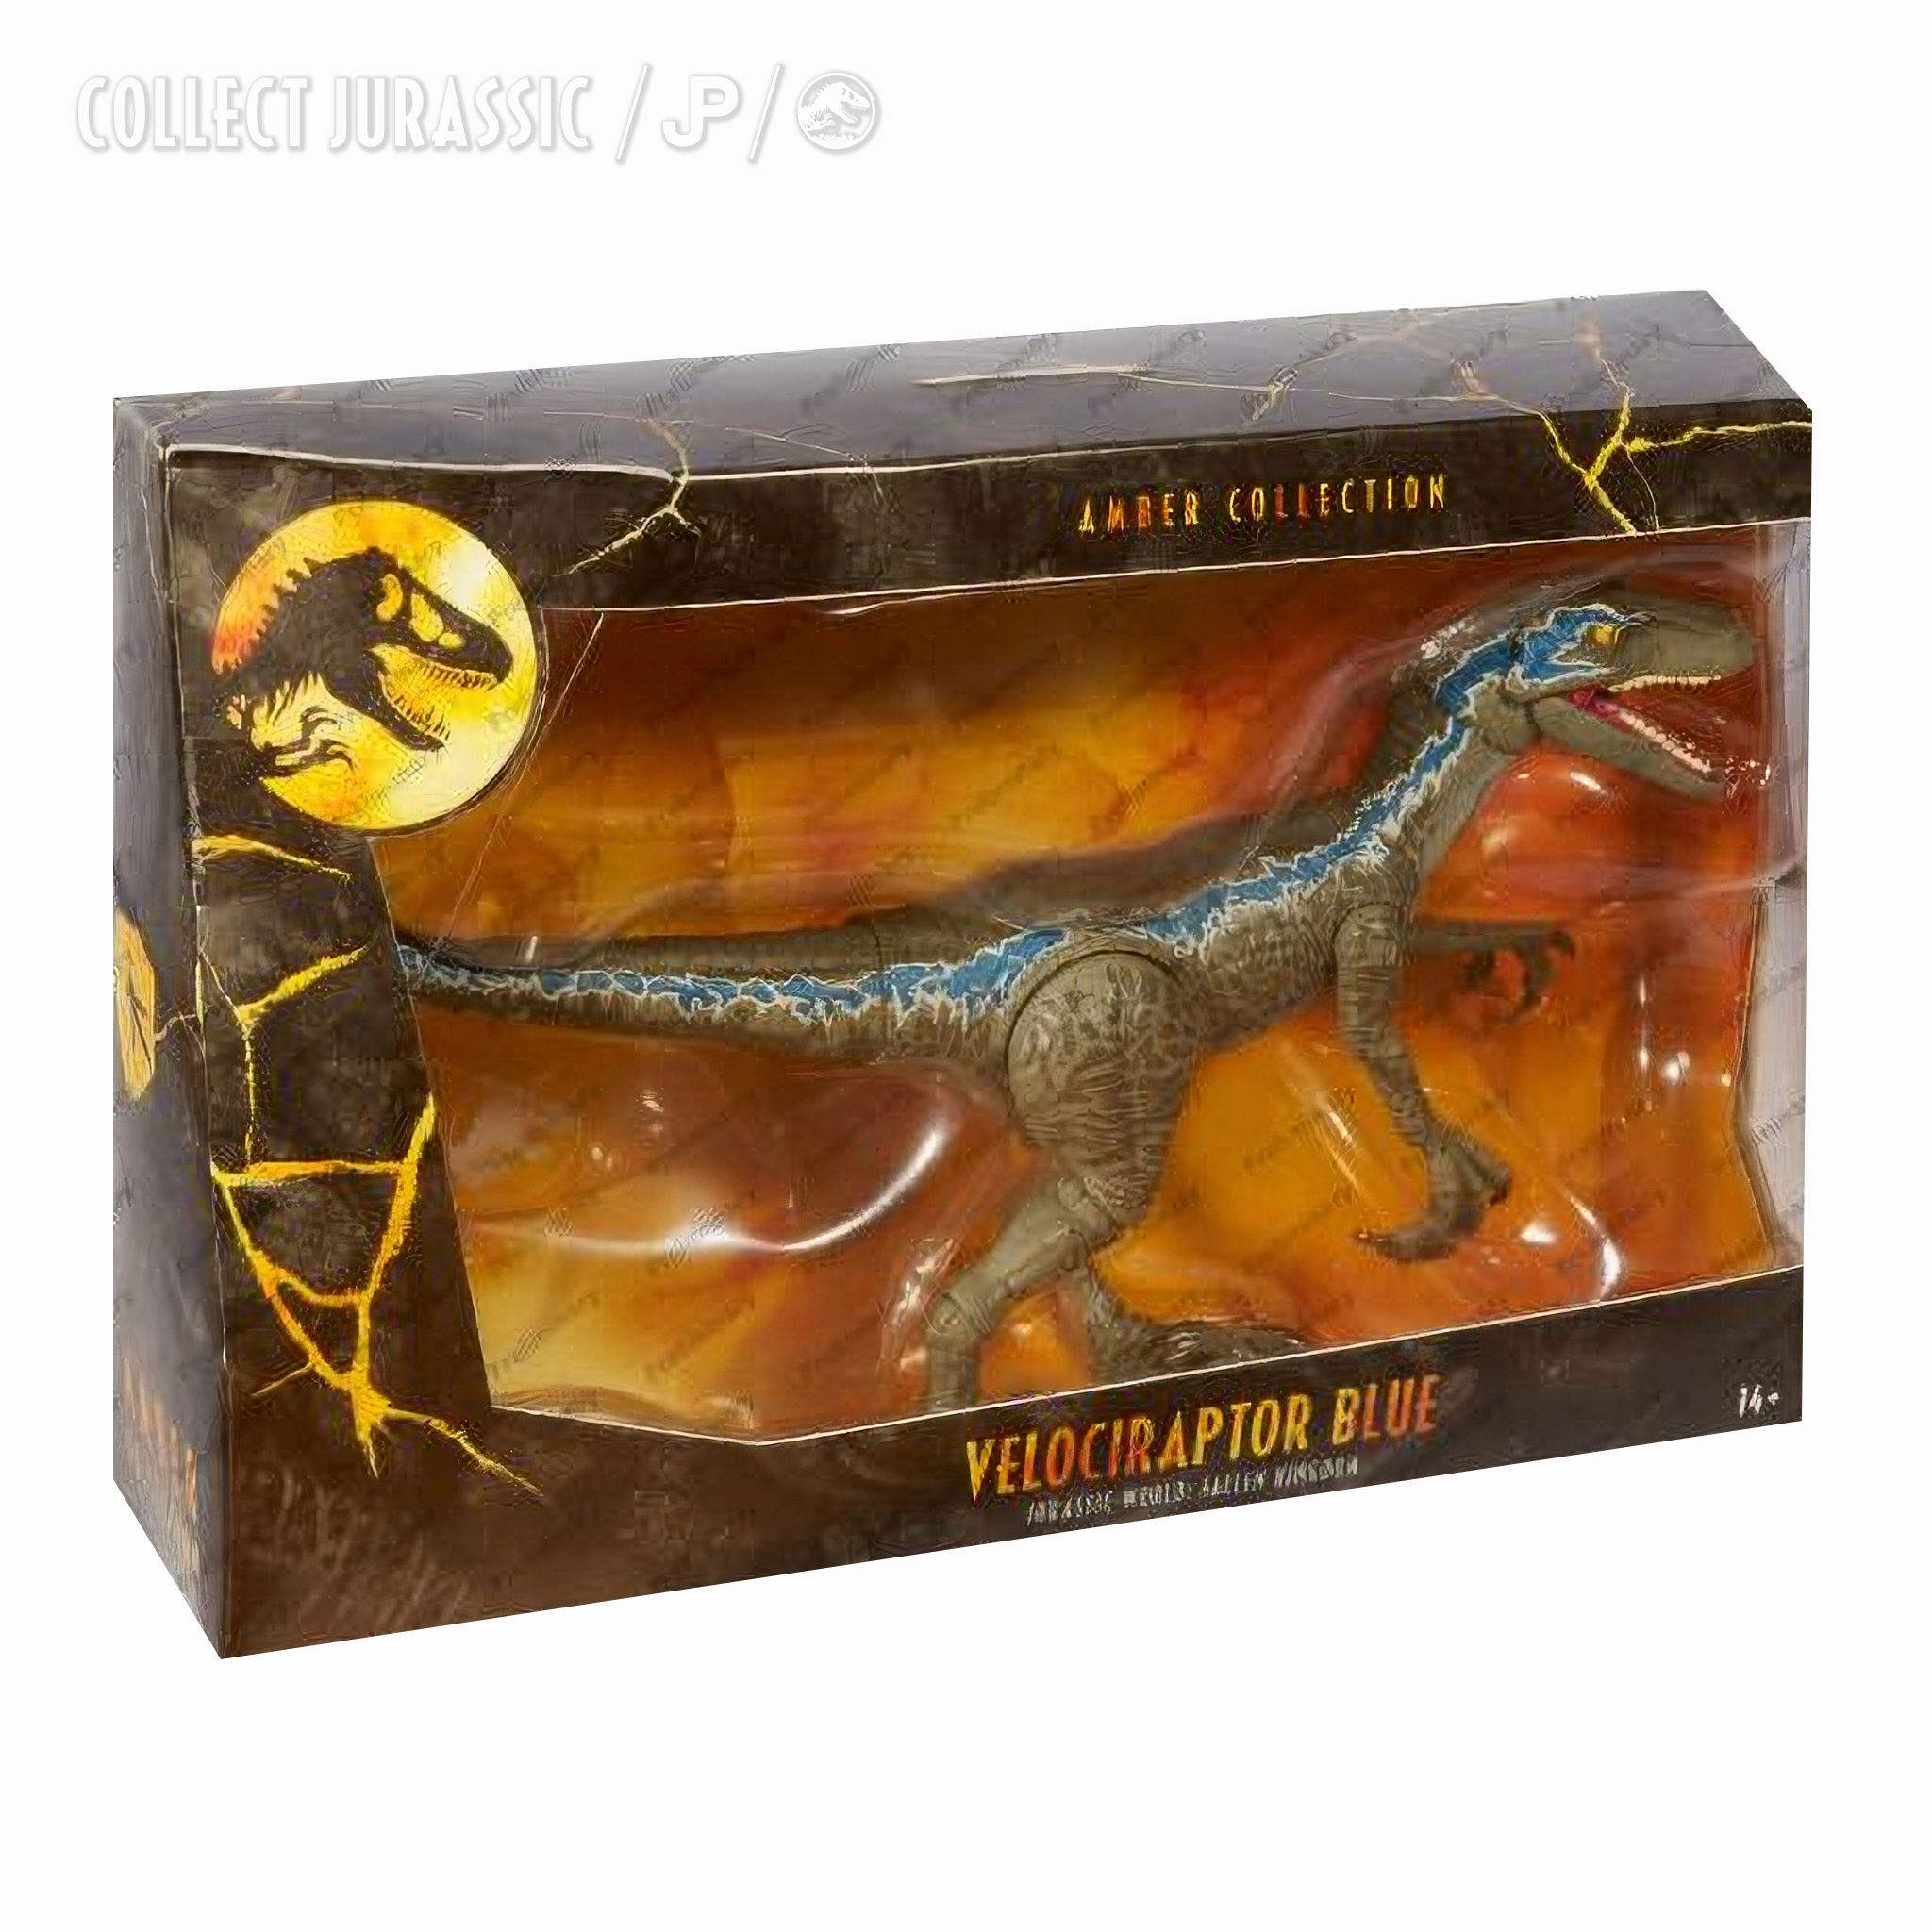 Amber collection. Amber collection Велоцираптор. Amber collection Jurassic Park Velociraptor. Velociraptor Amber collection Блю. Jurassic World Amber collection Velociraptor Blue.